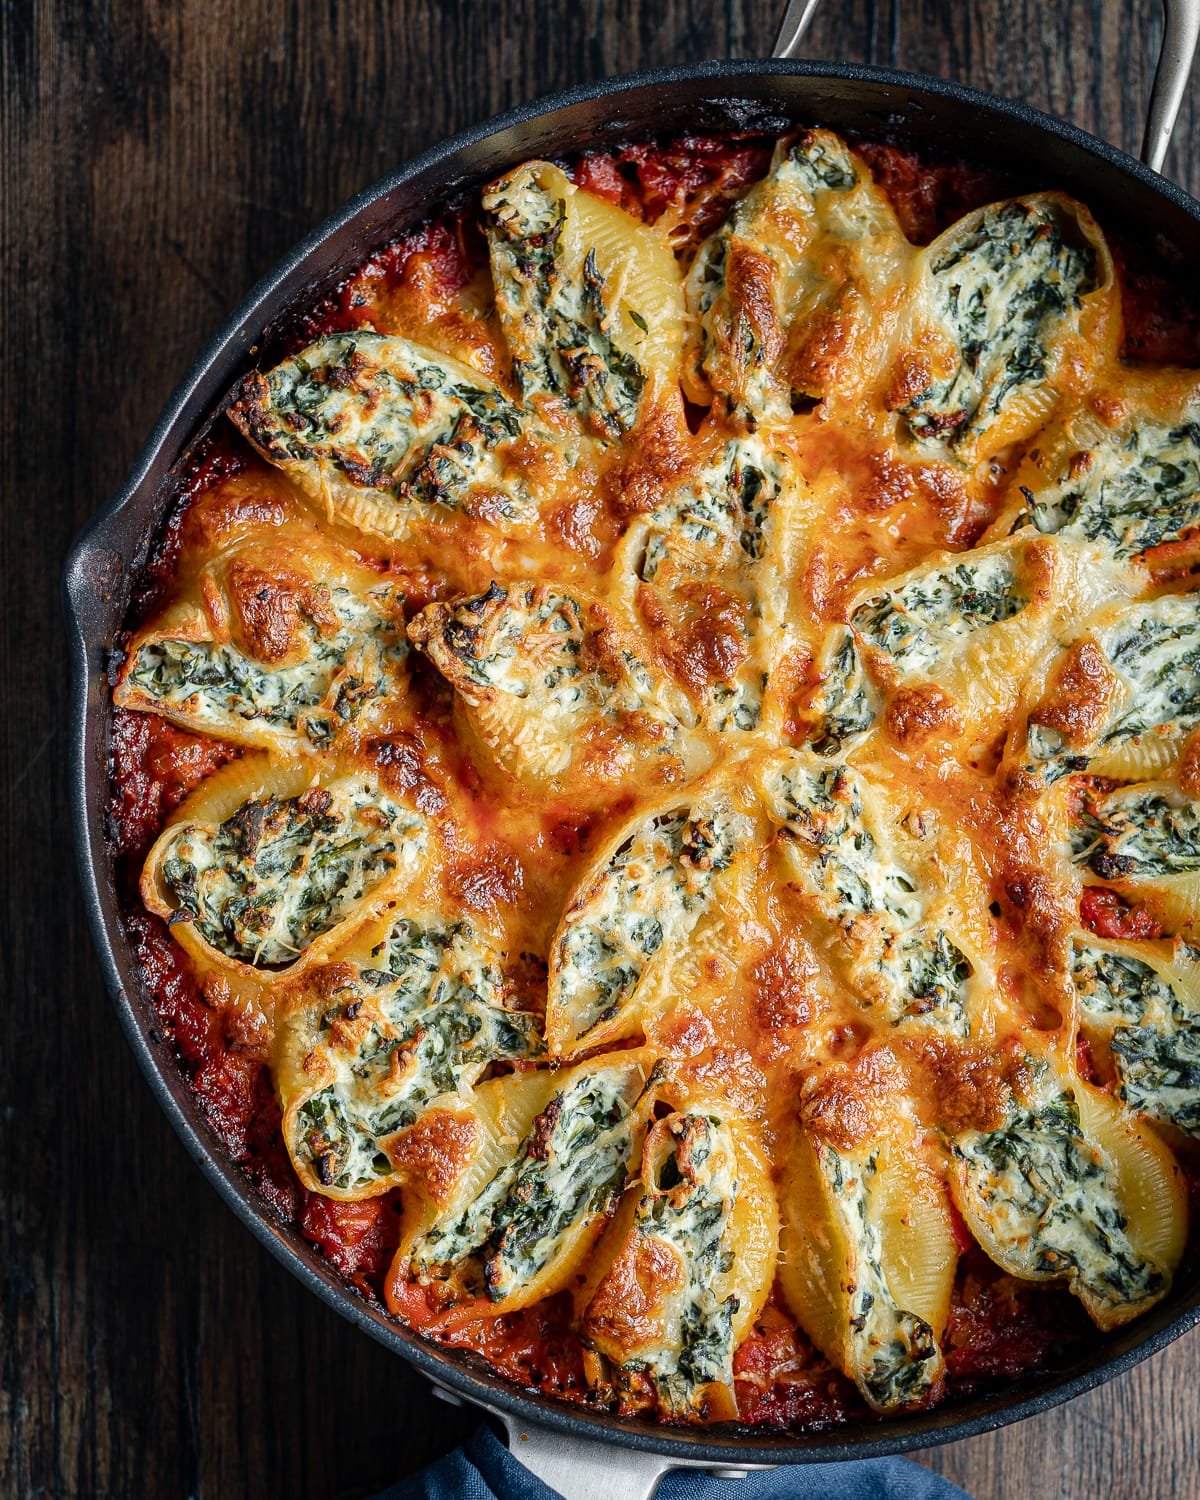 Stuffed Pasta shells with spinach and ricotta